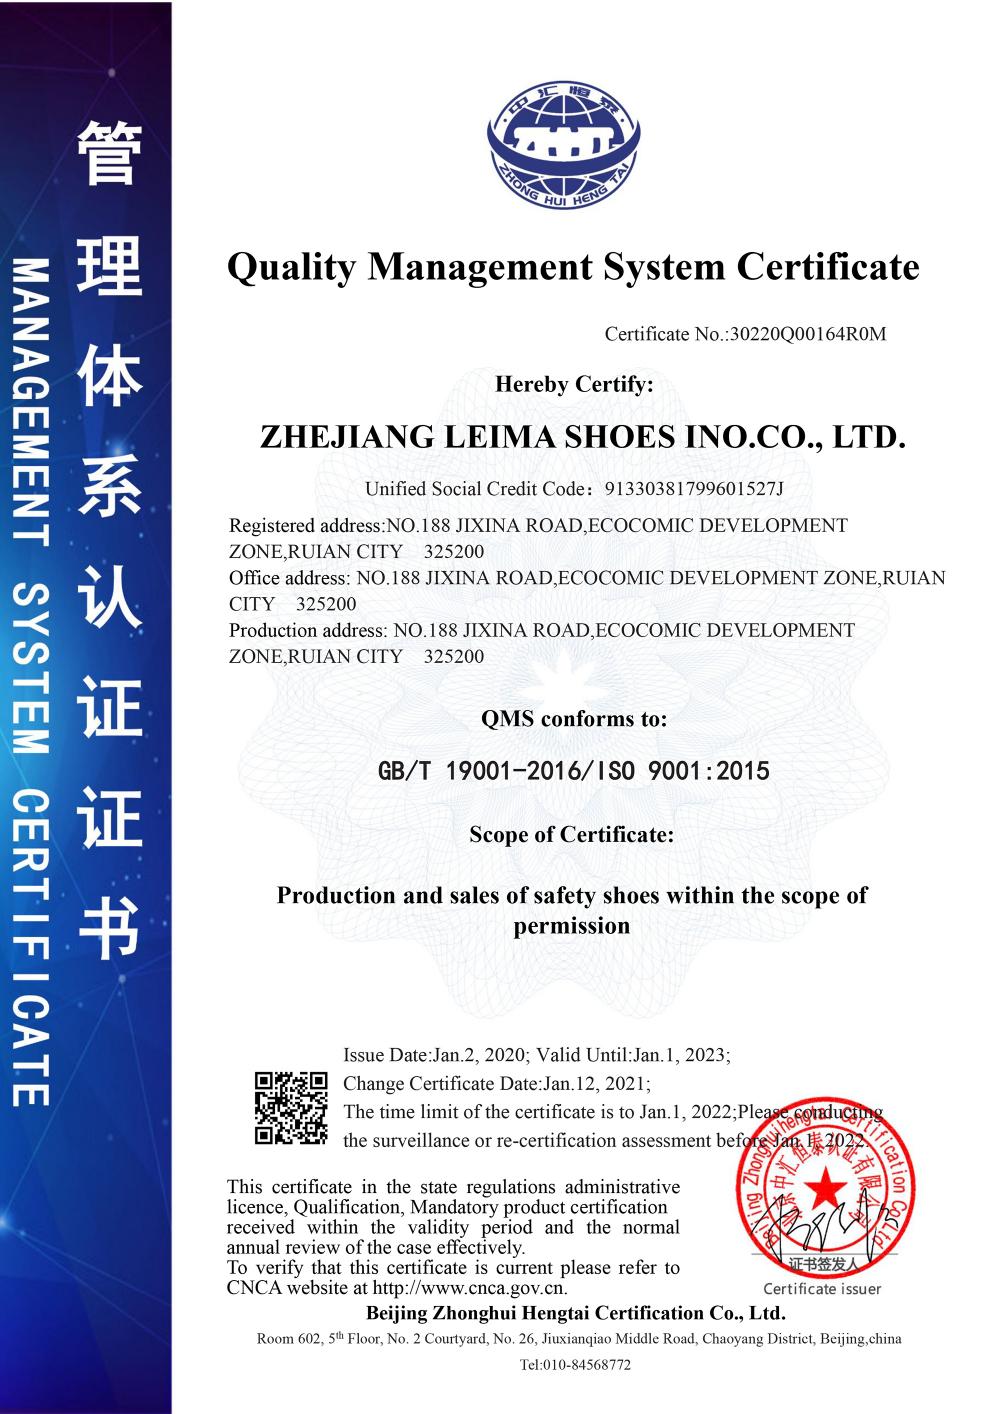 Environmental Management System Certificate